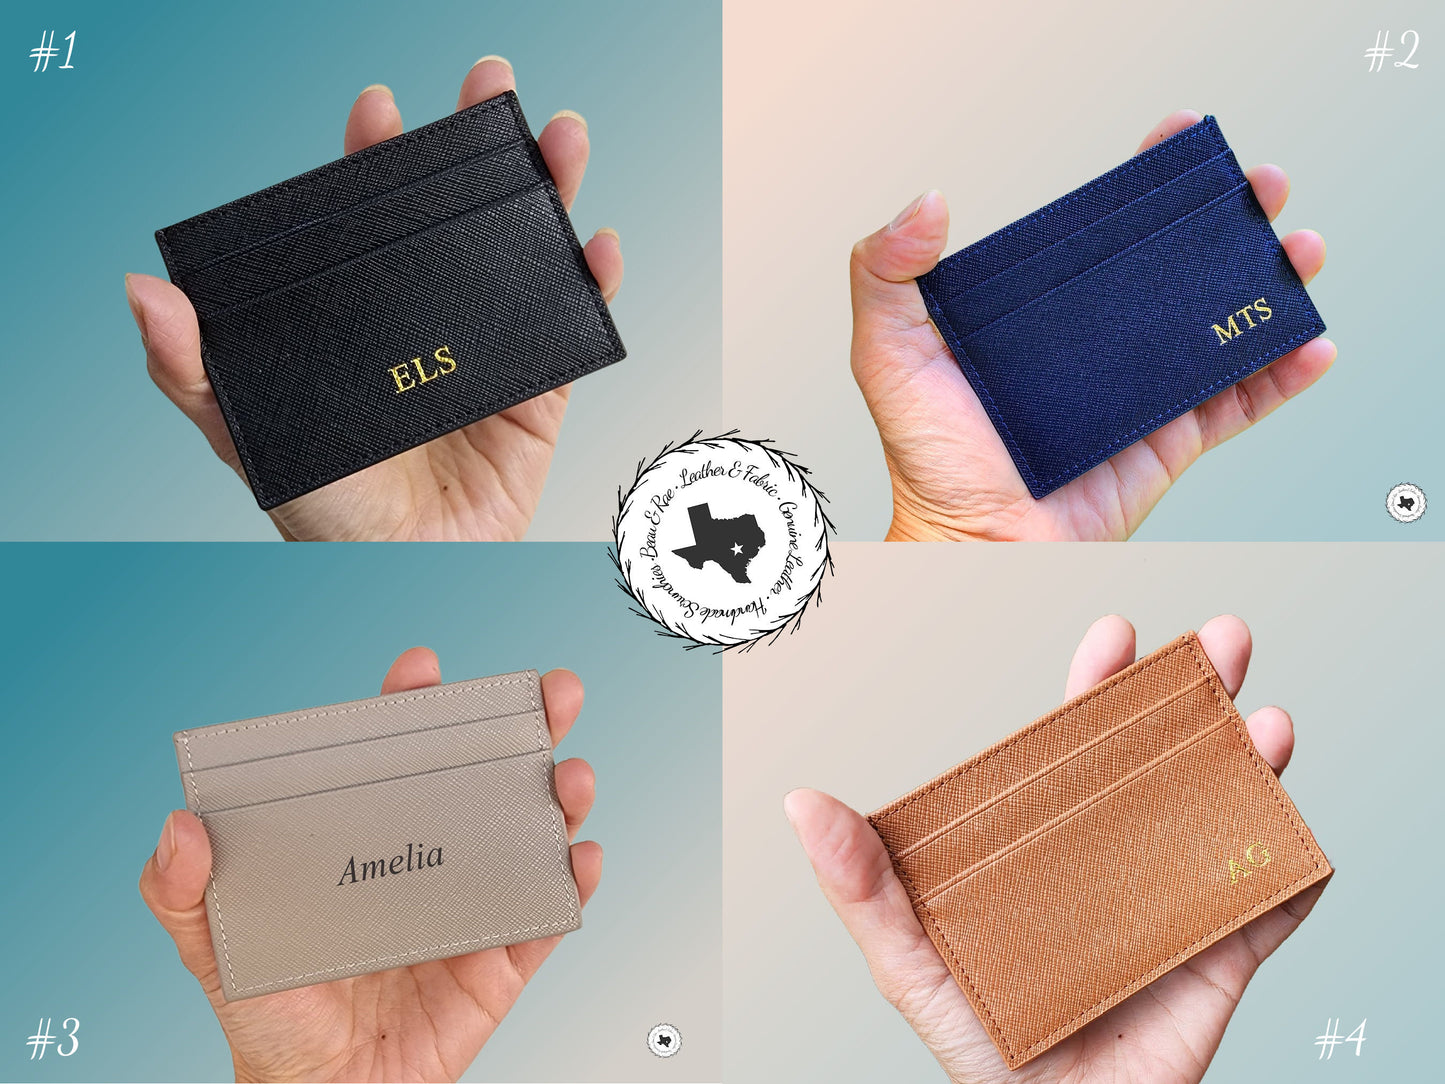 Personalized Monogram Credit Card Holder, Black Blue Mint Green Orange Pink Red Brown Gray Purple, Saffiano Leather Minimalist Card Wallet